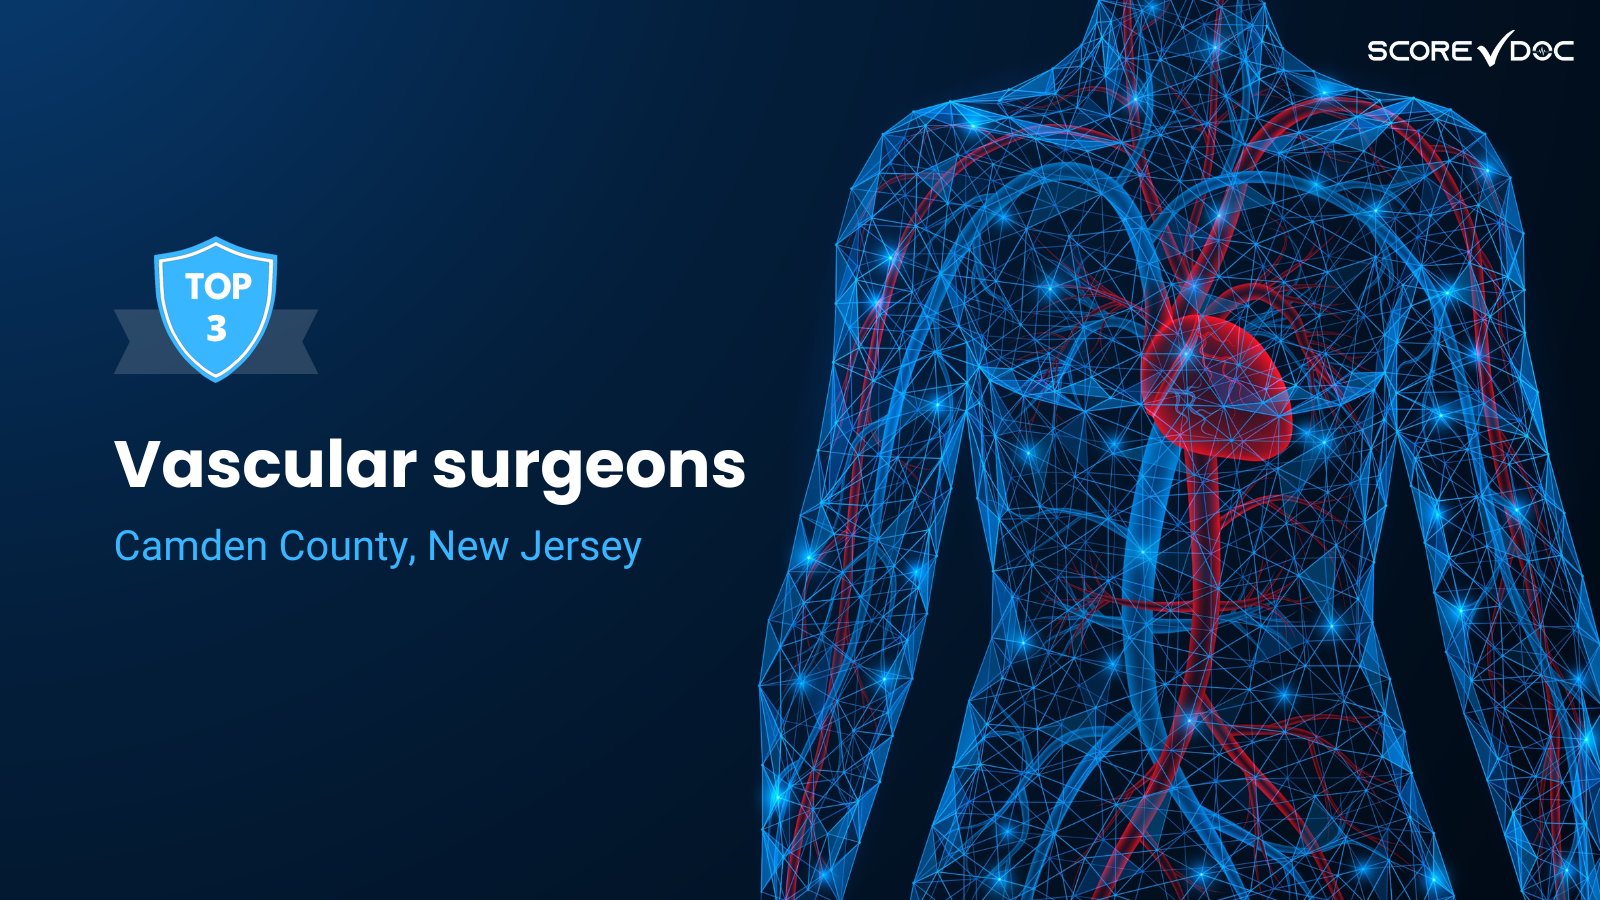 5 Highest Rated Vascular surgeons in Camden County, New Jersey 